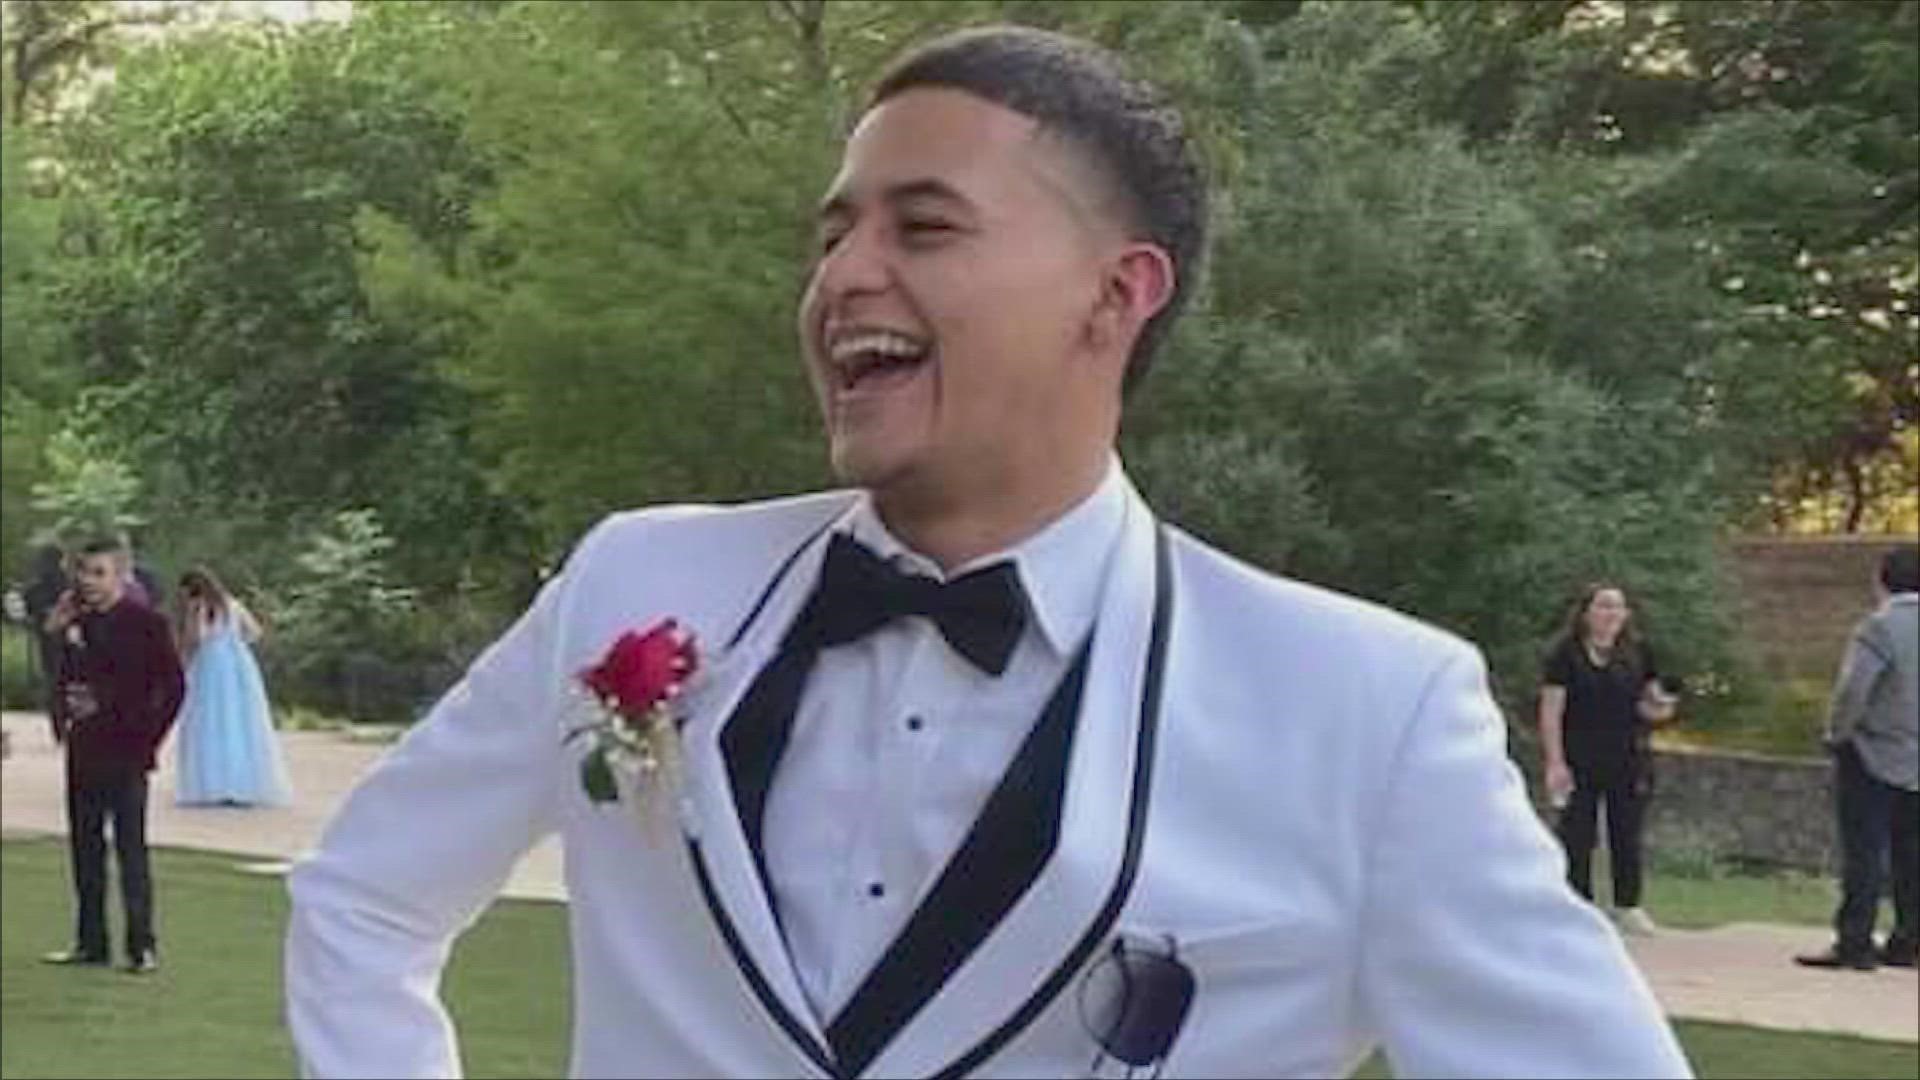 His sisters Elizabeth Jaimes and Genevieve spoke with KENS 5 about losing their baby brother.  They recounted the phone calls when they got the news.